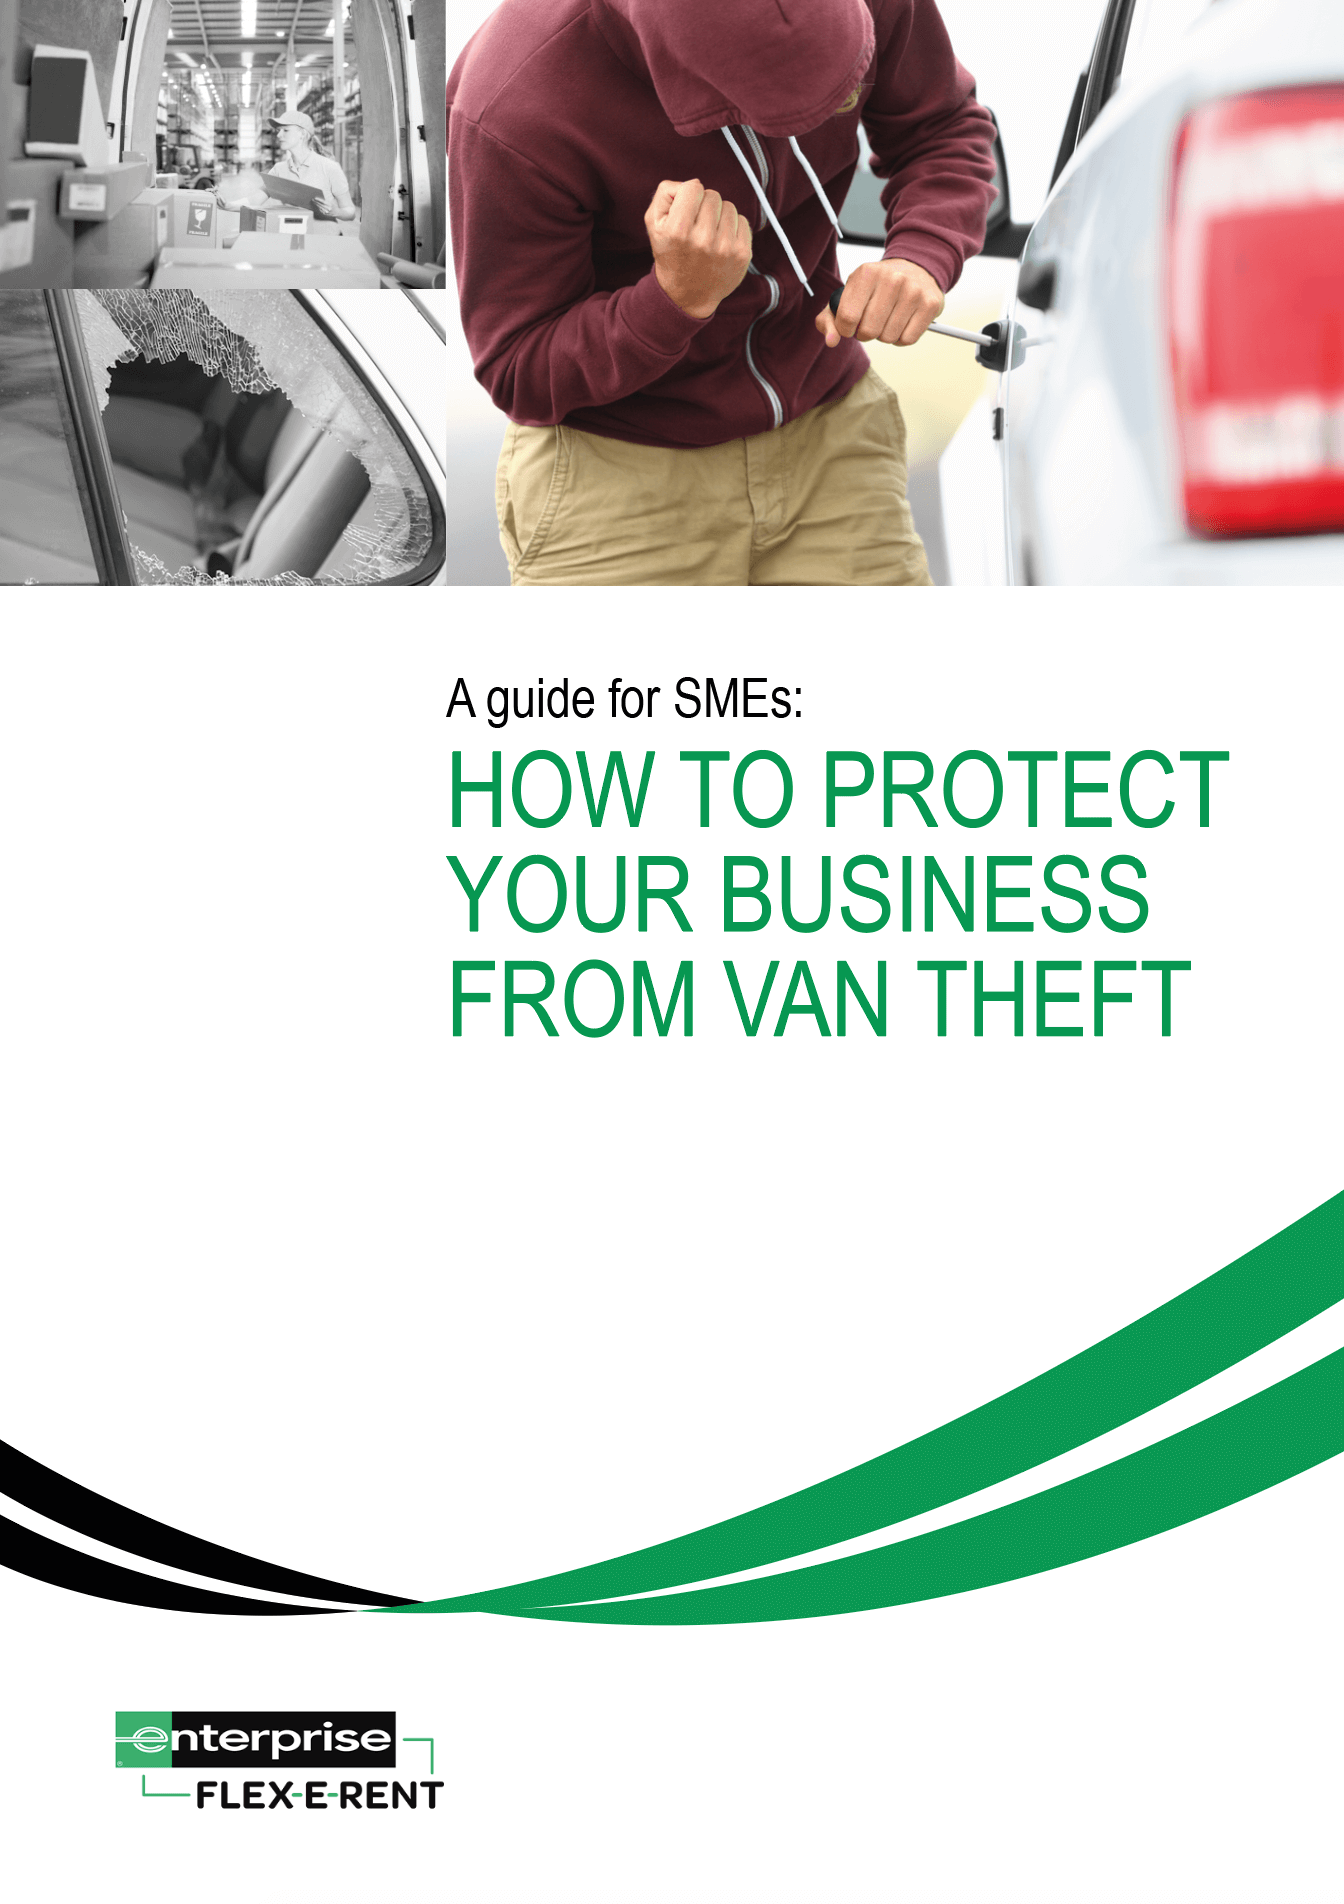 How to protect your business from van theft